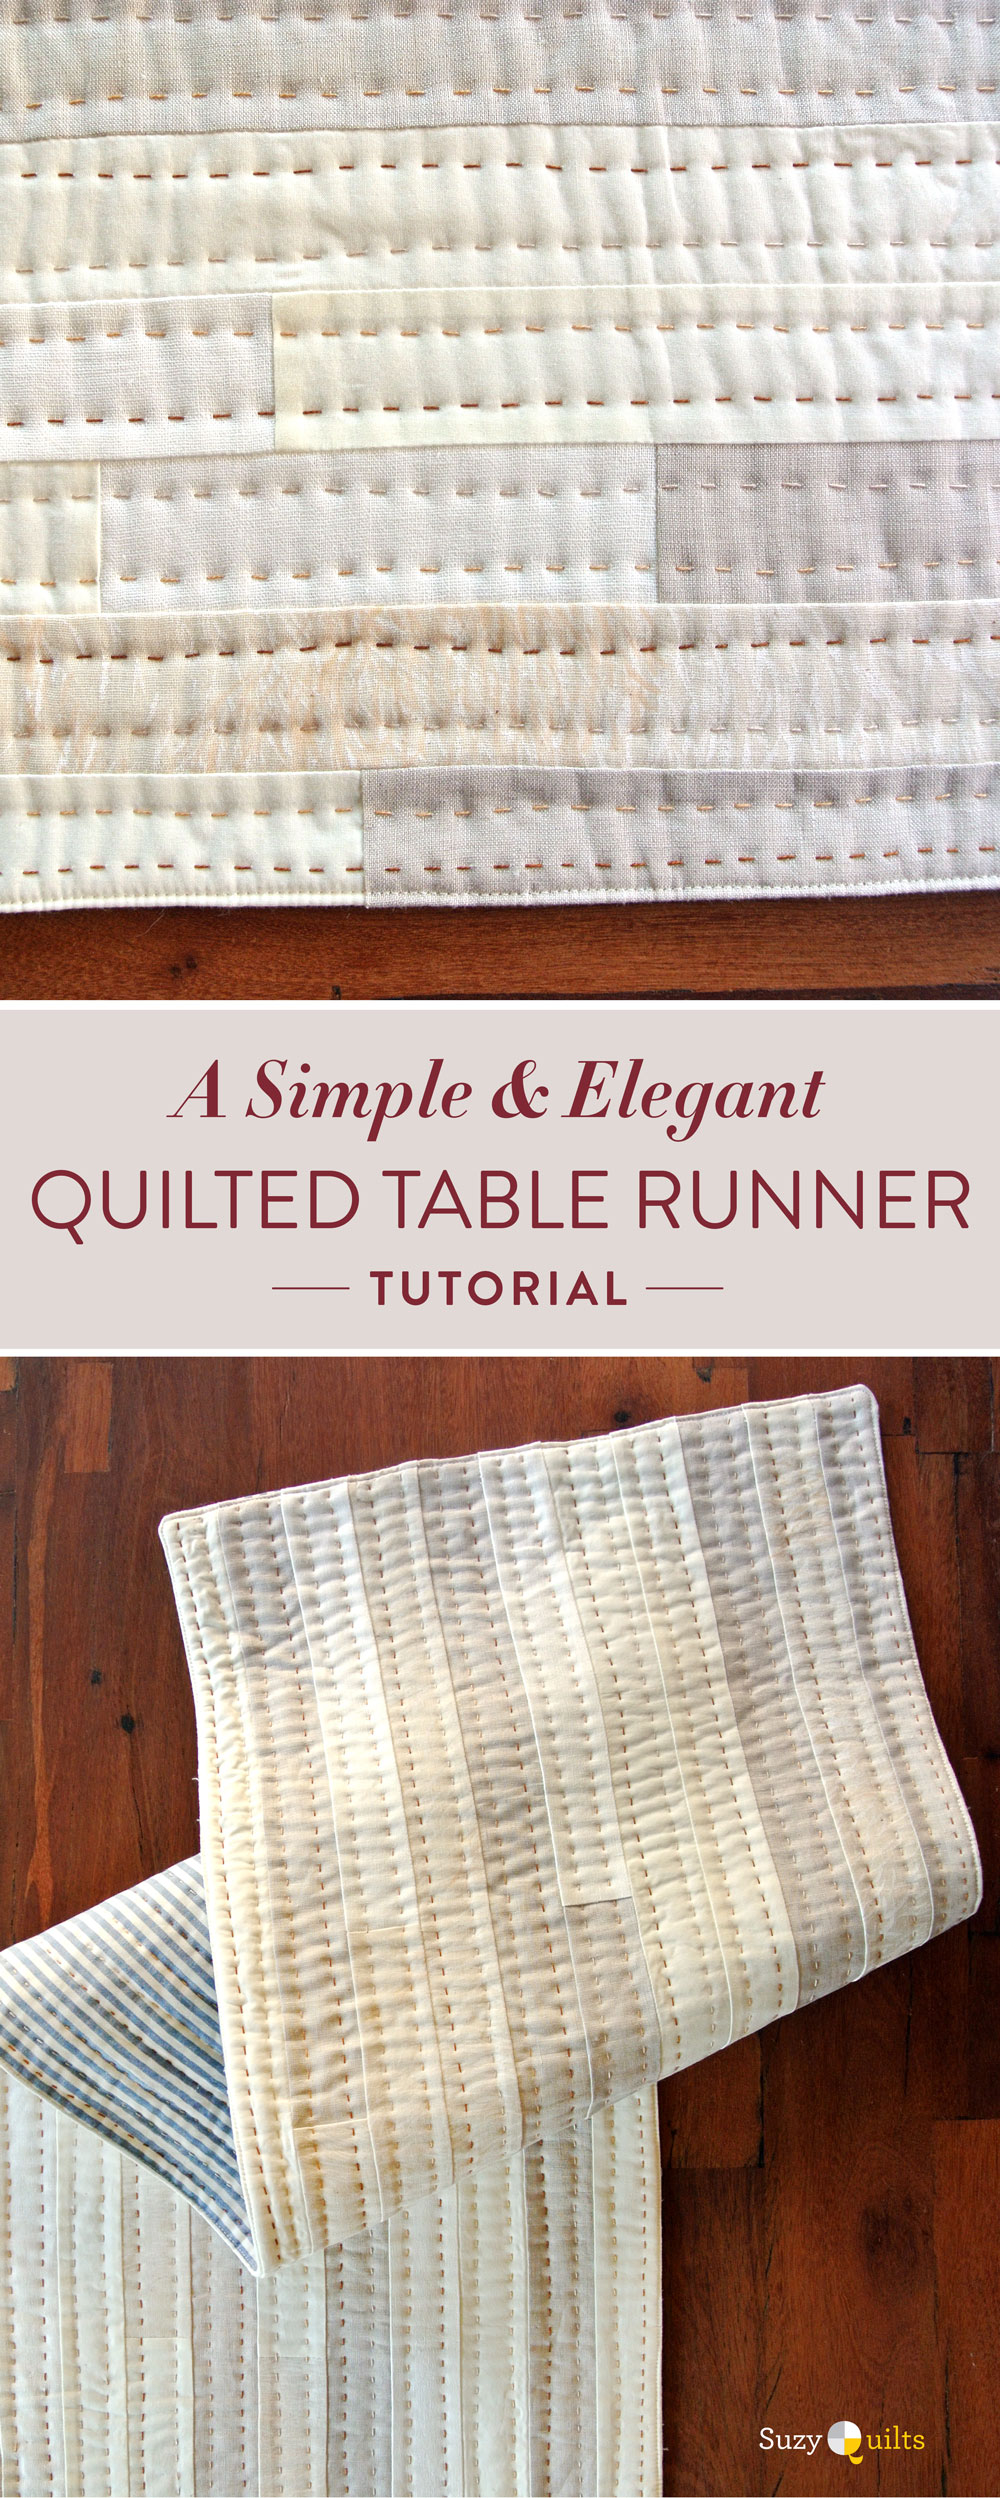 A Simple and Elegant Quilted Table Runner Tutorial Hand Quilting | Suzy Quilts https://suzyquilts.com/quilted-table-runner-tutorial